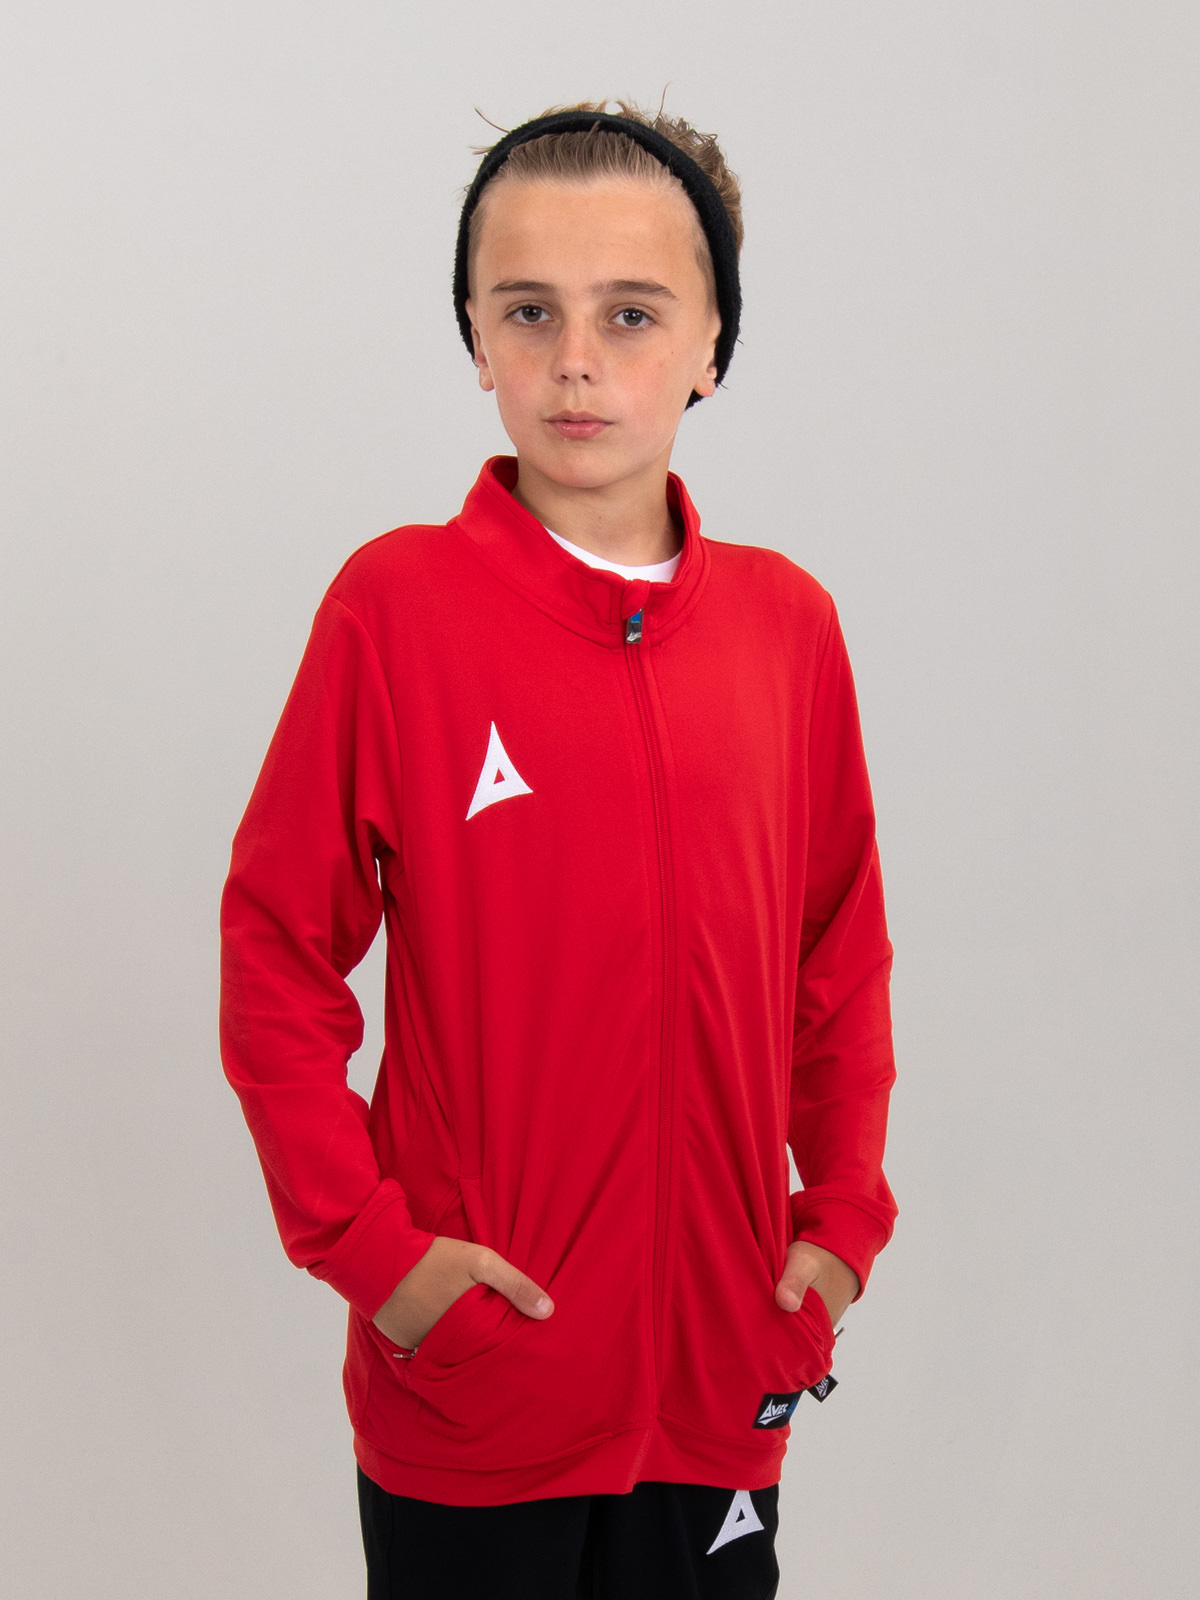 a plain red kids tracksuit jacket is being worn by a young child.